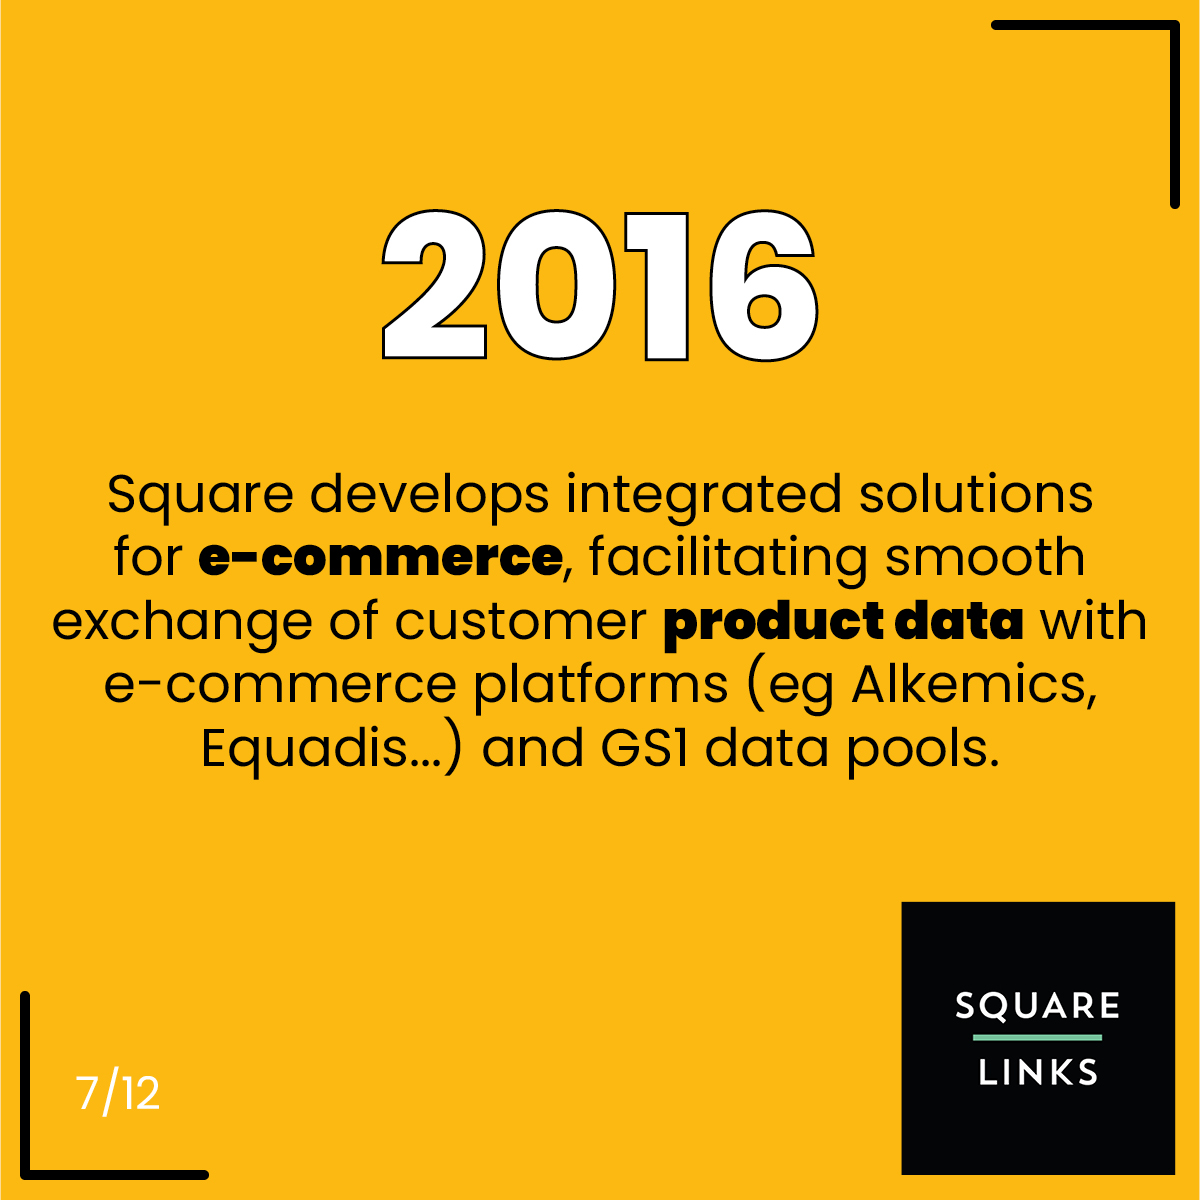 2016, Square develops integrated solutions for e-commerce, facilitating smooth exchange of customer product data with e-commerce platforms (eg Alkemics, Equadis...) and GS1 data pools.